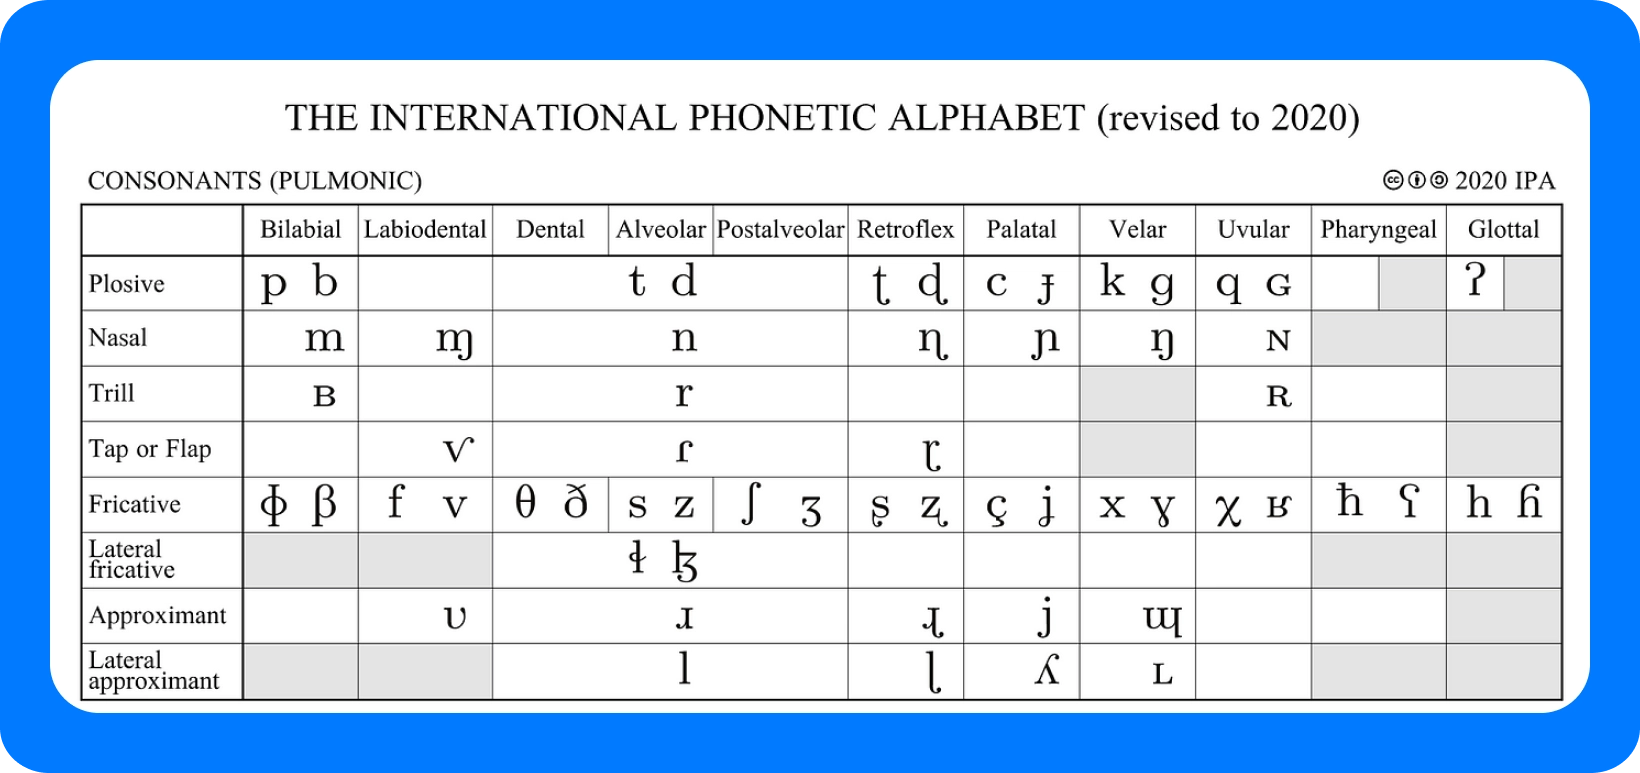 Chart of the International Phonetic Alphabet for consonants, revised in 2020, detailing articulation points.